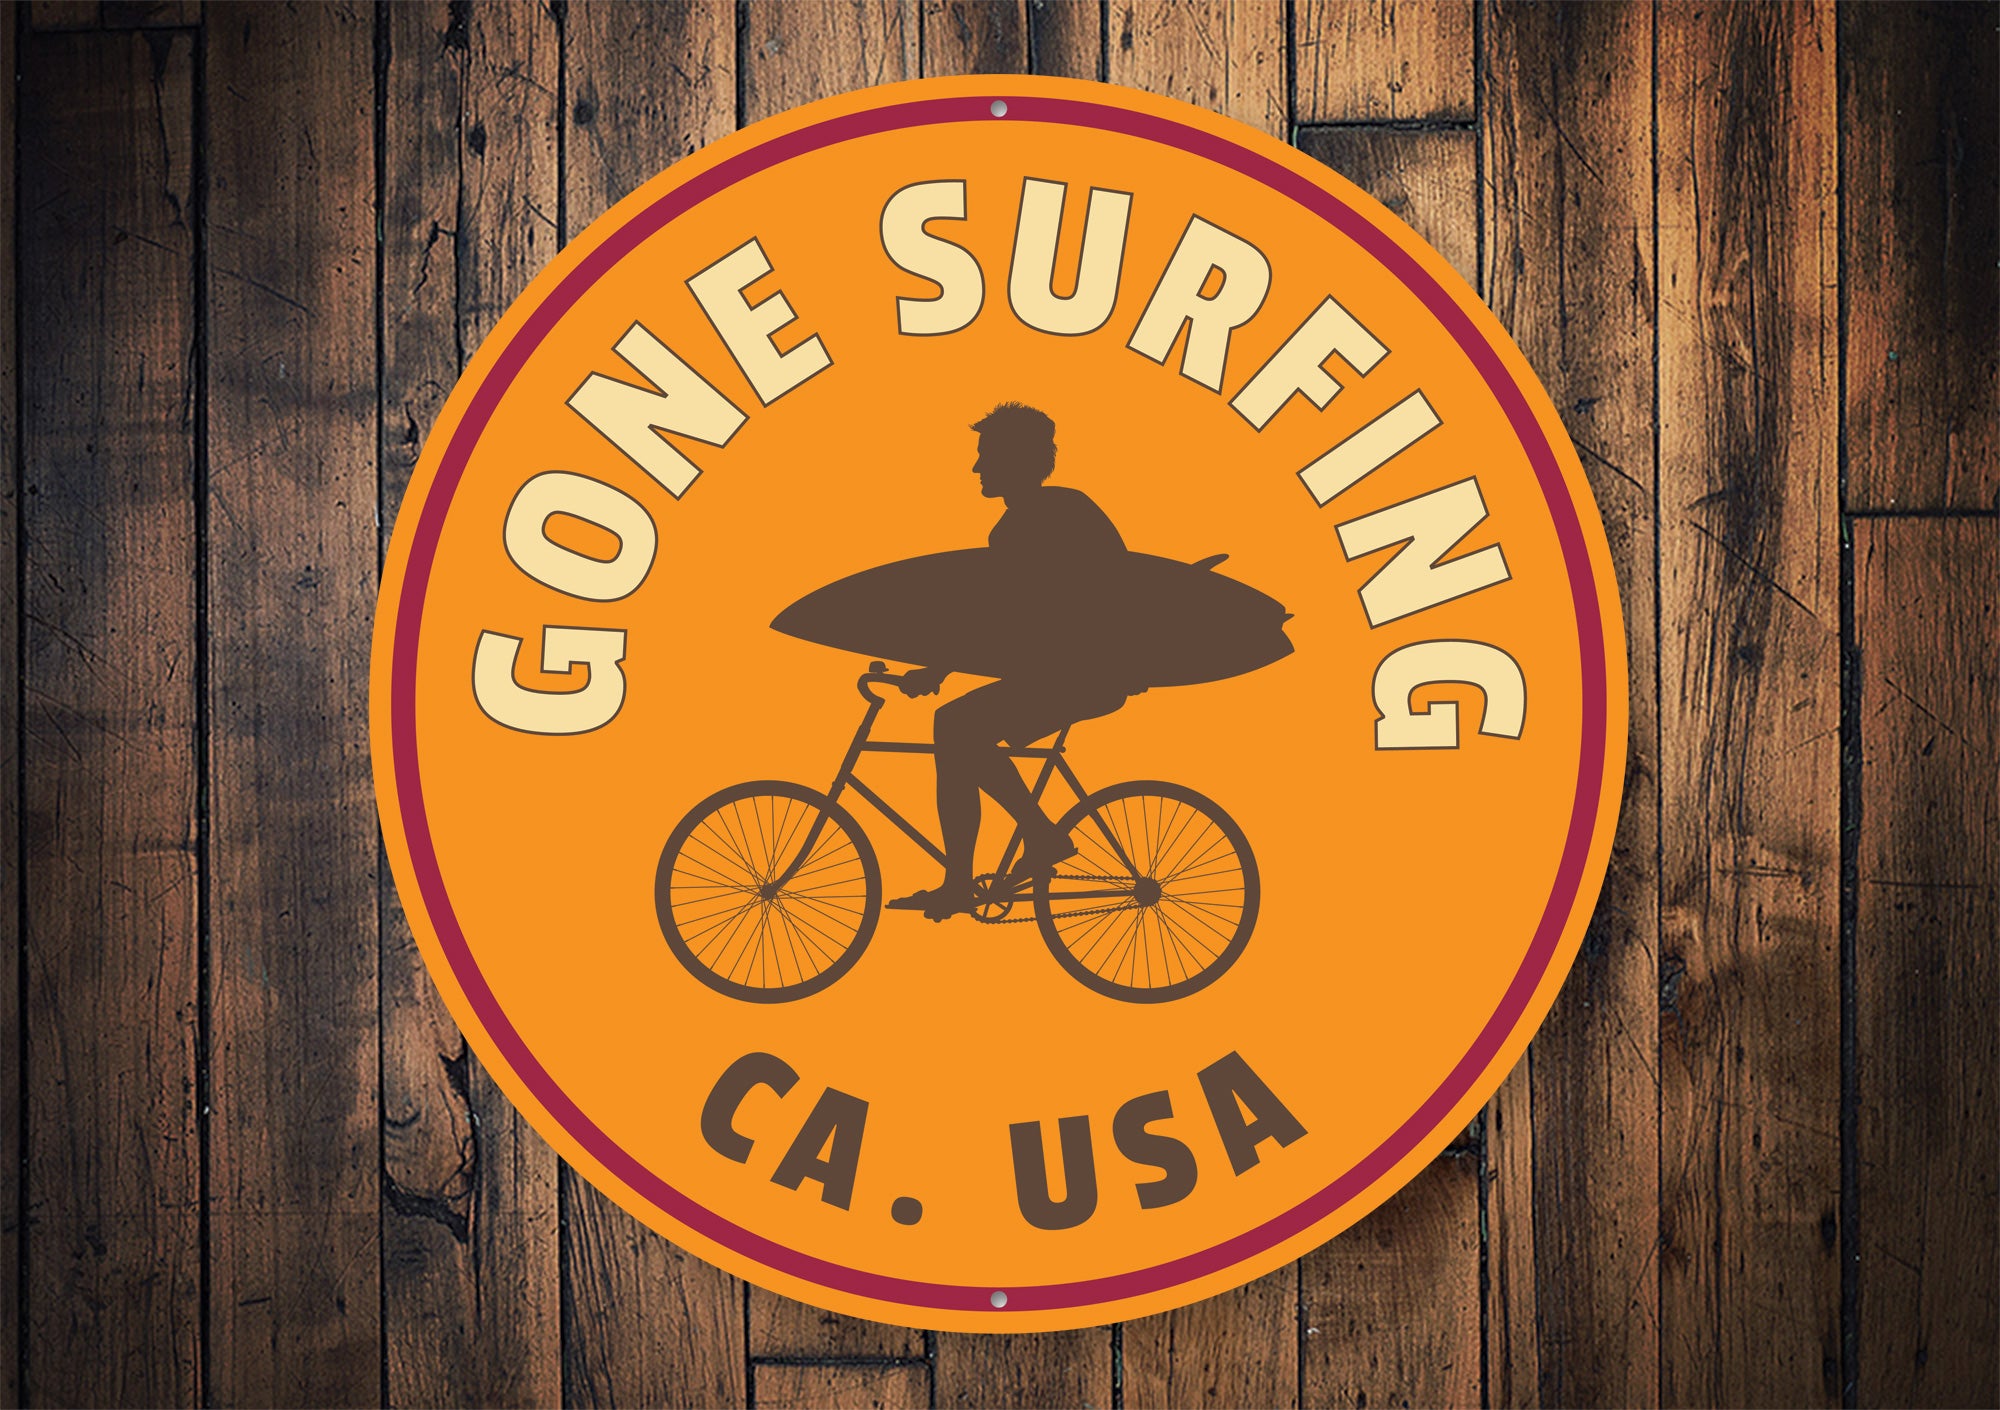 Gone Surfing USA Sign